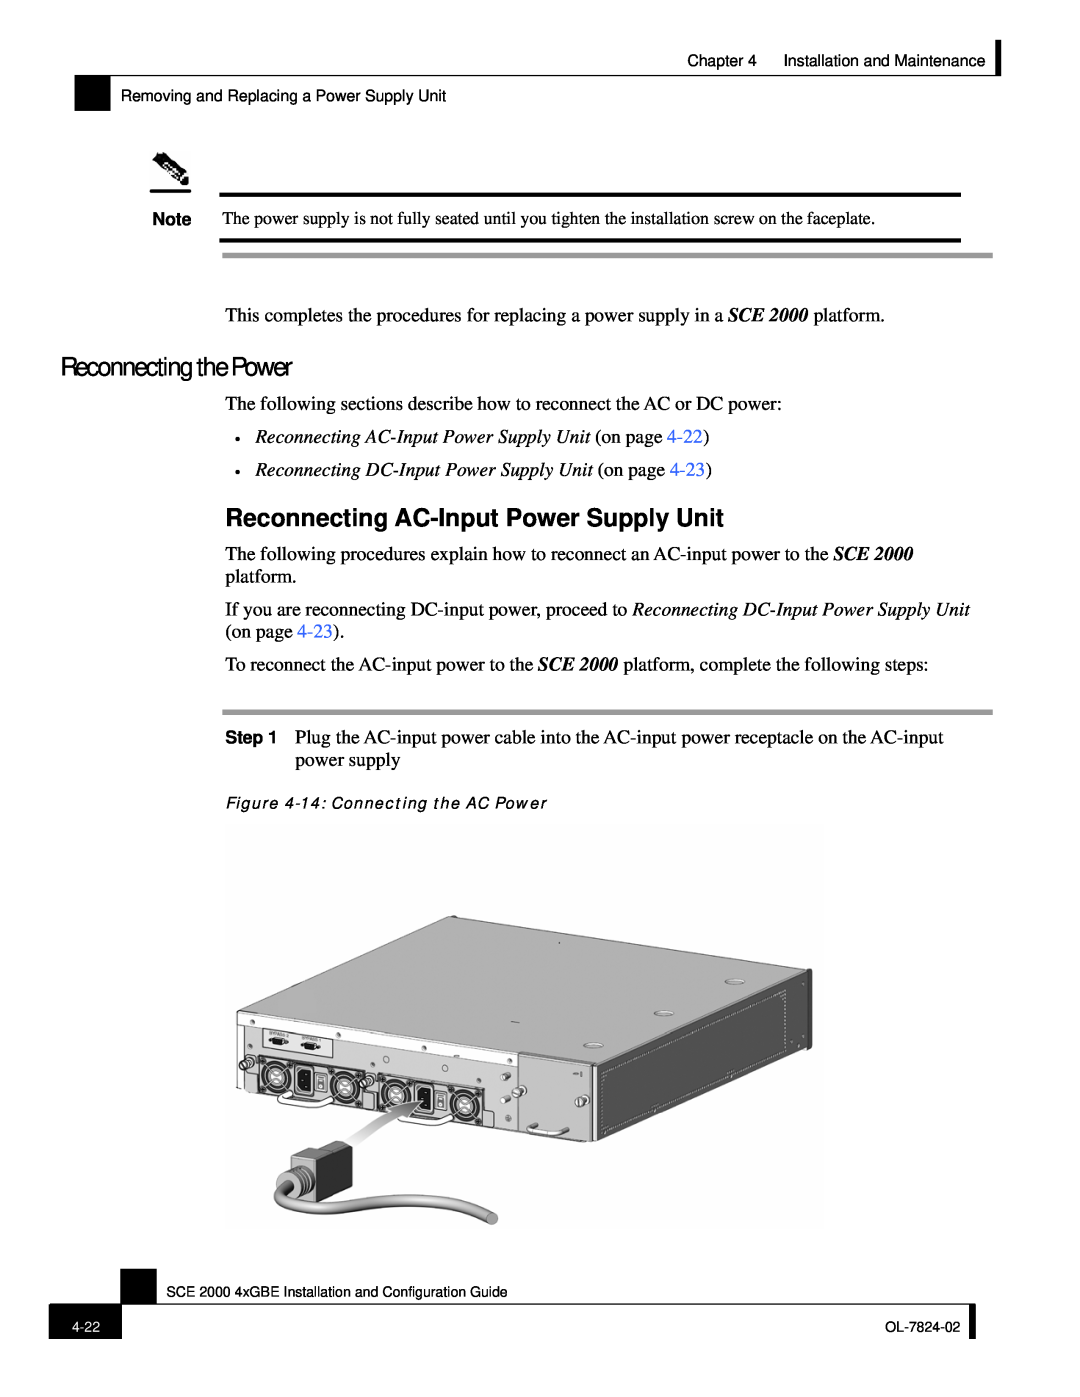 Cisco Systems SCE 2000 4xGBE manual Reconnecting the Power, Reconnecting AC-Input Power Supply Unit 